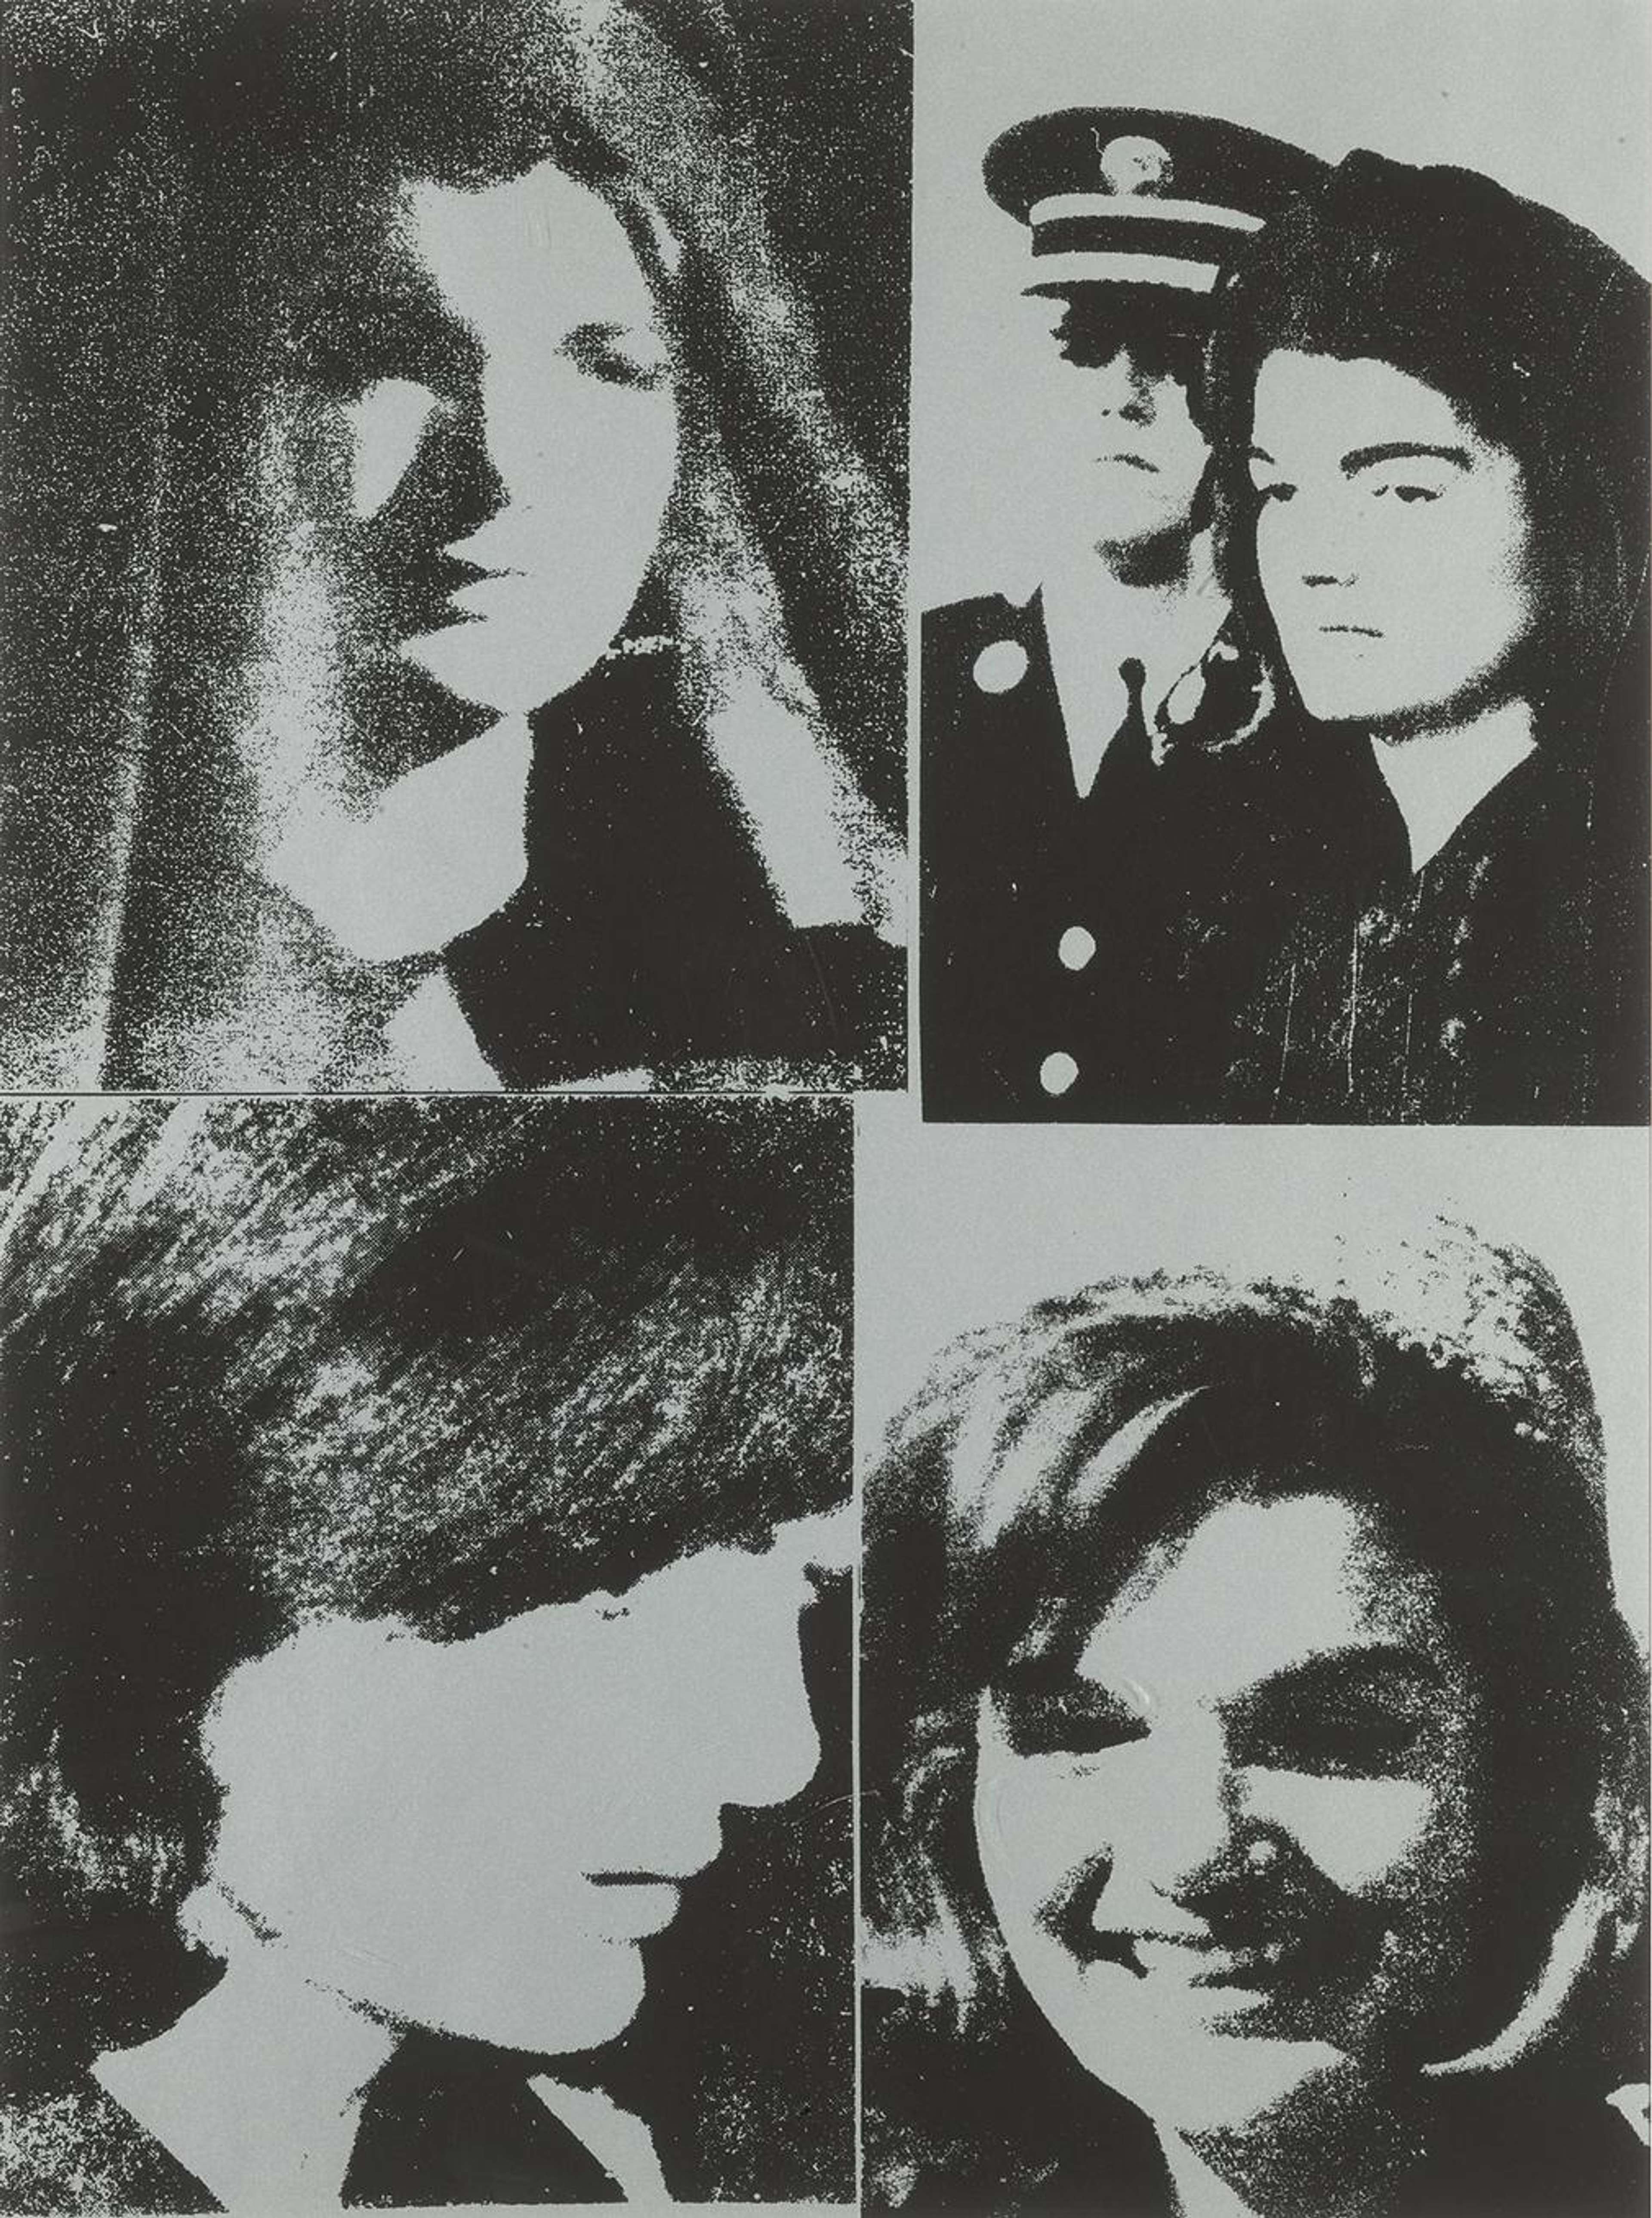 The print shows a set of four press photographs of Kennedy, that Warhol had collected in the months following President John F. Kennedy’s assassination, left largely untouched by the artist in their Original, grainy black and white form.